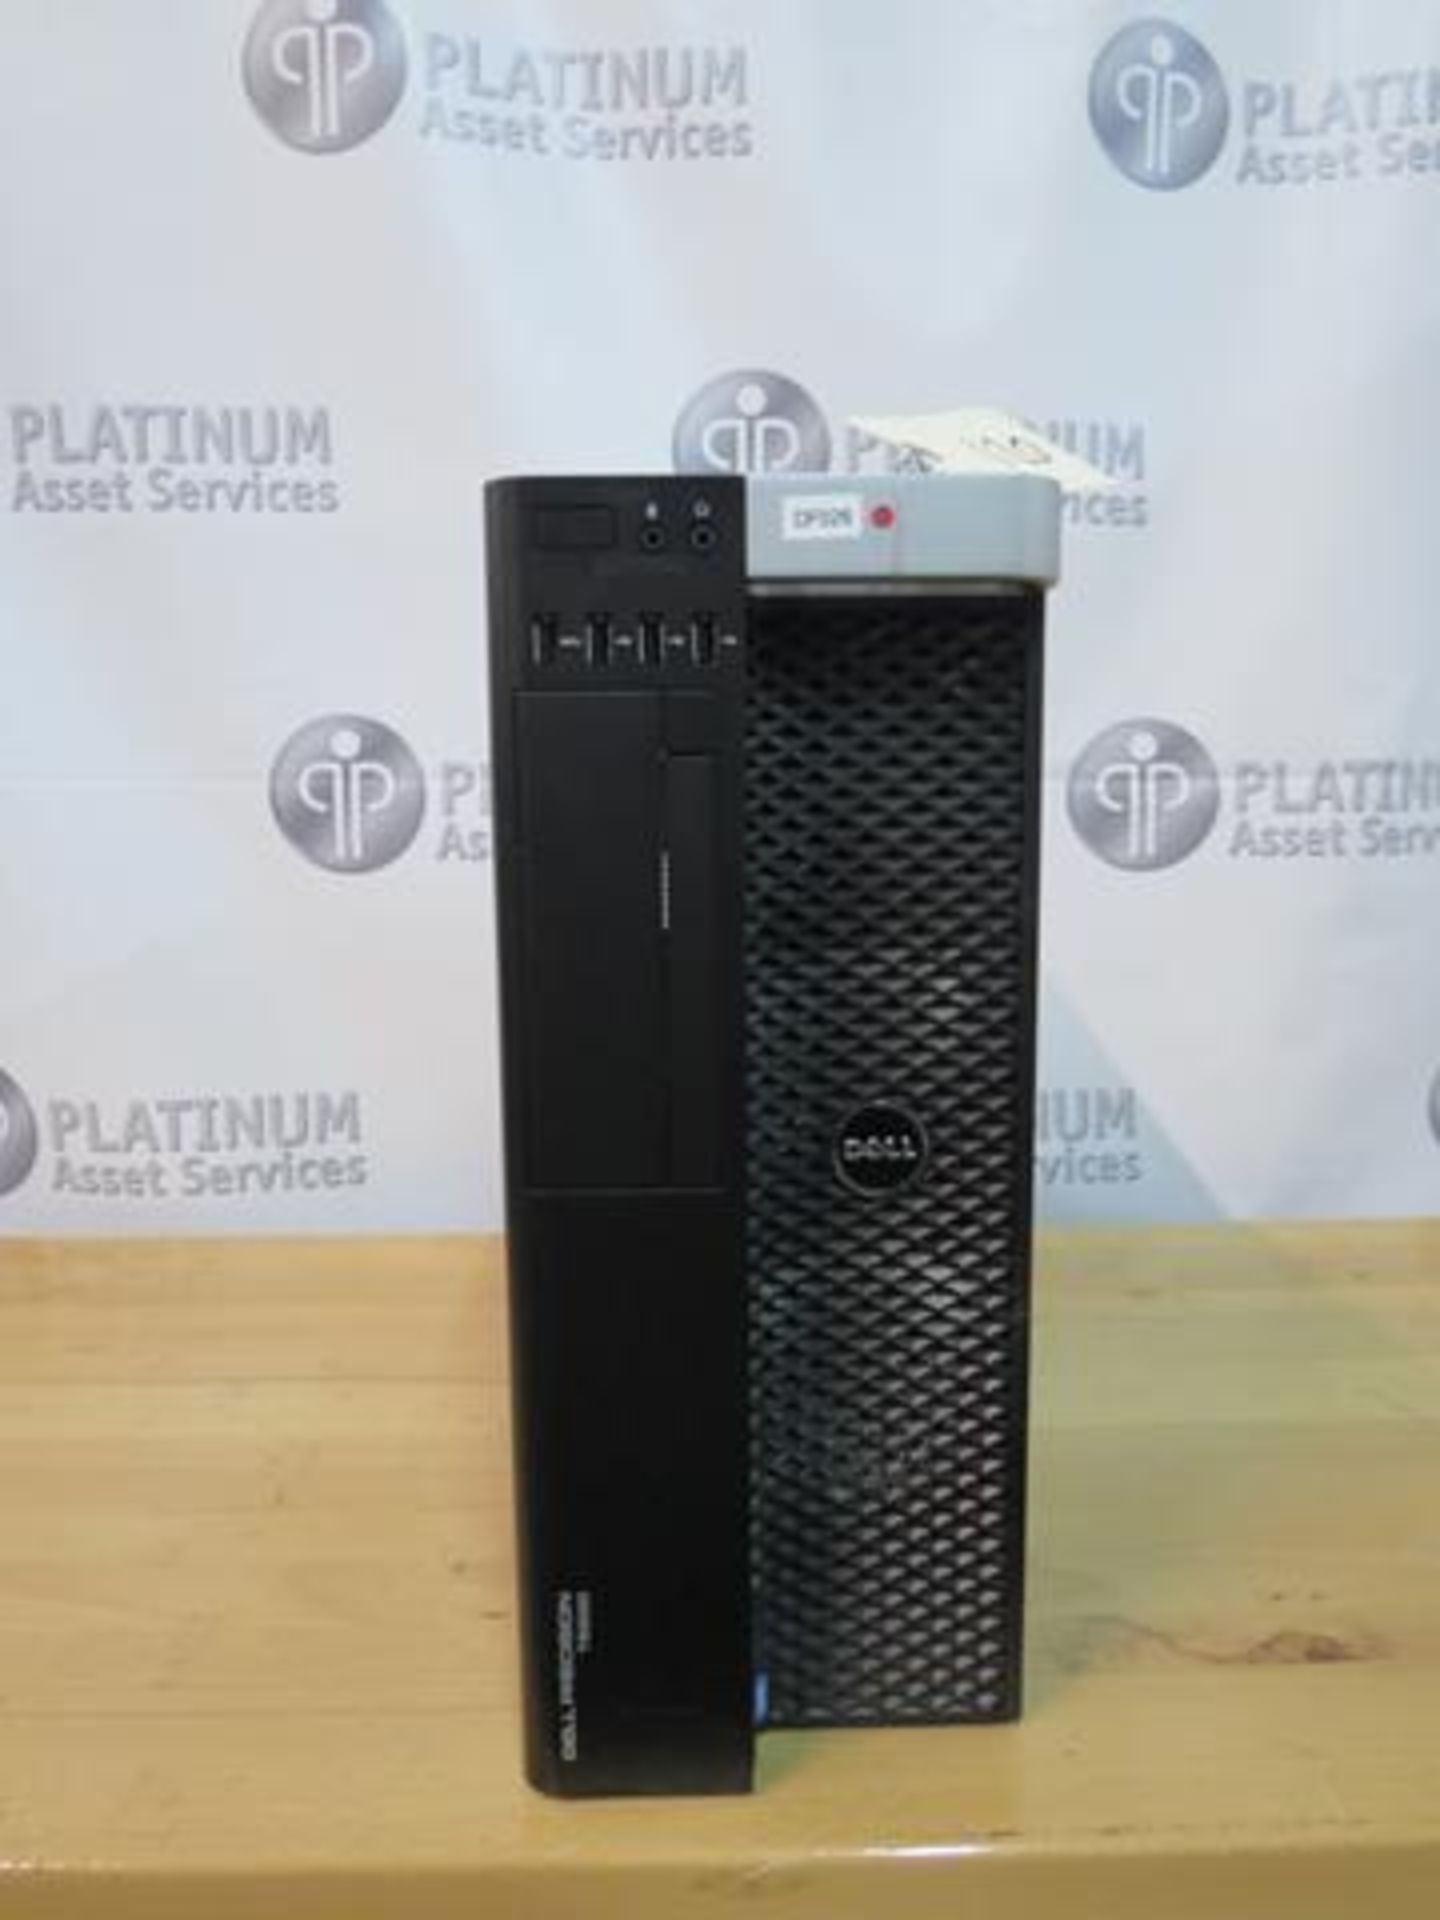 DELL, PRECISION T5600, DESKTOP WORKSTATION (UNIT DOES NOT BOOT UP) (TAG#120)